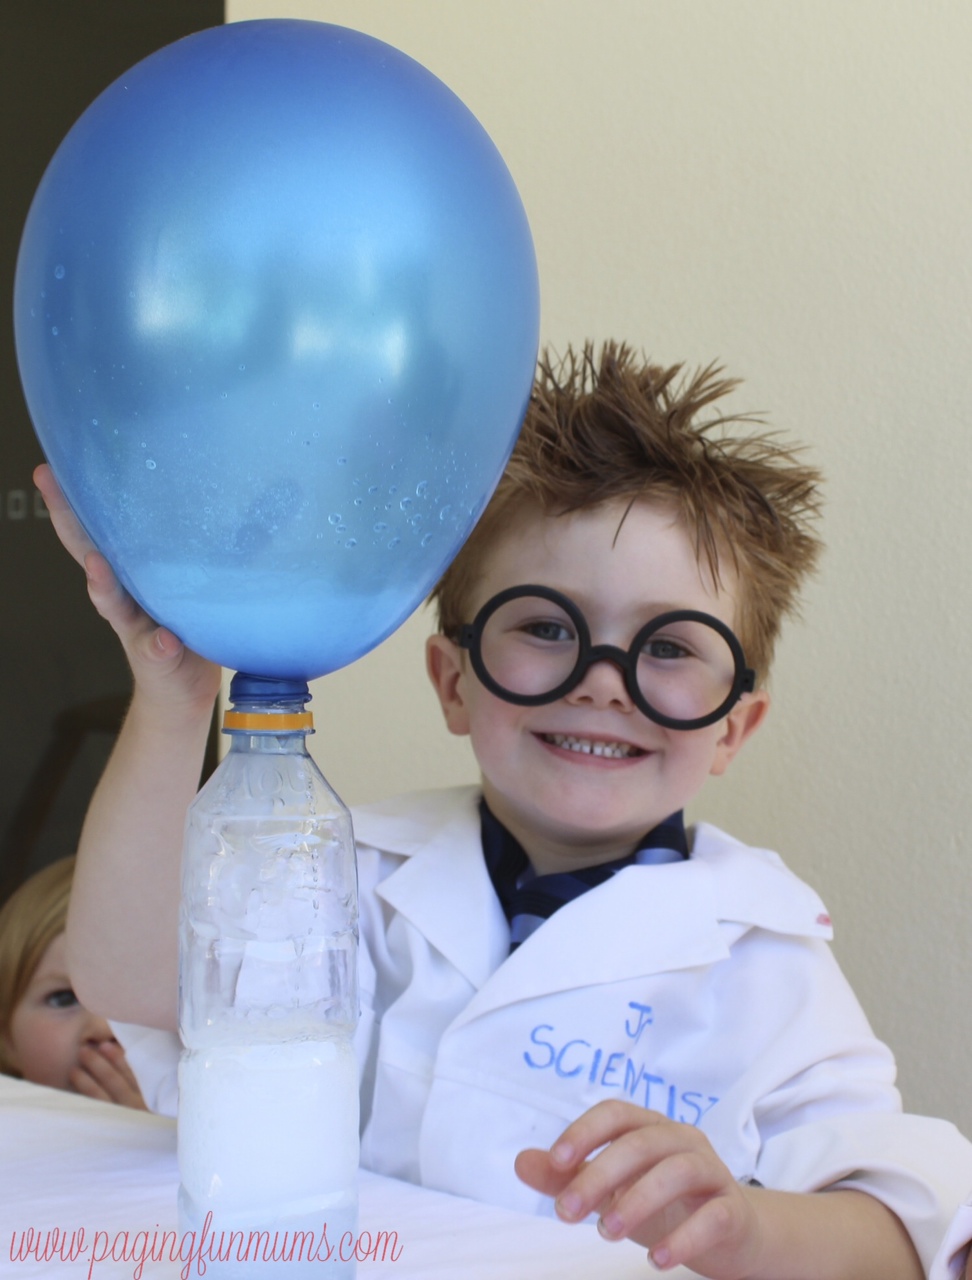 Look at the smile! The cutest little scientist ever!